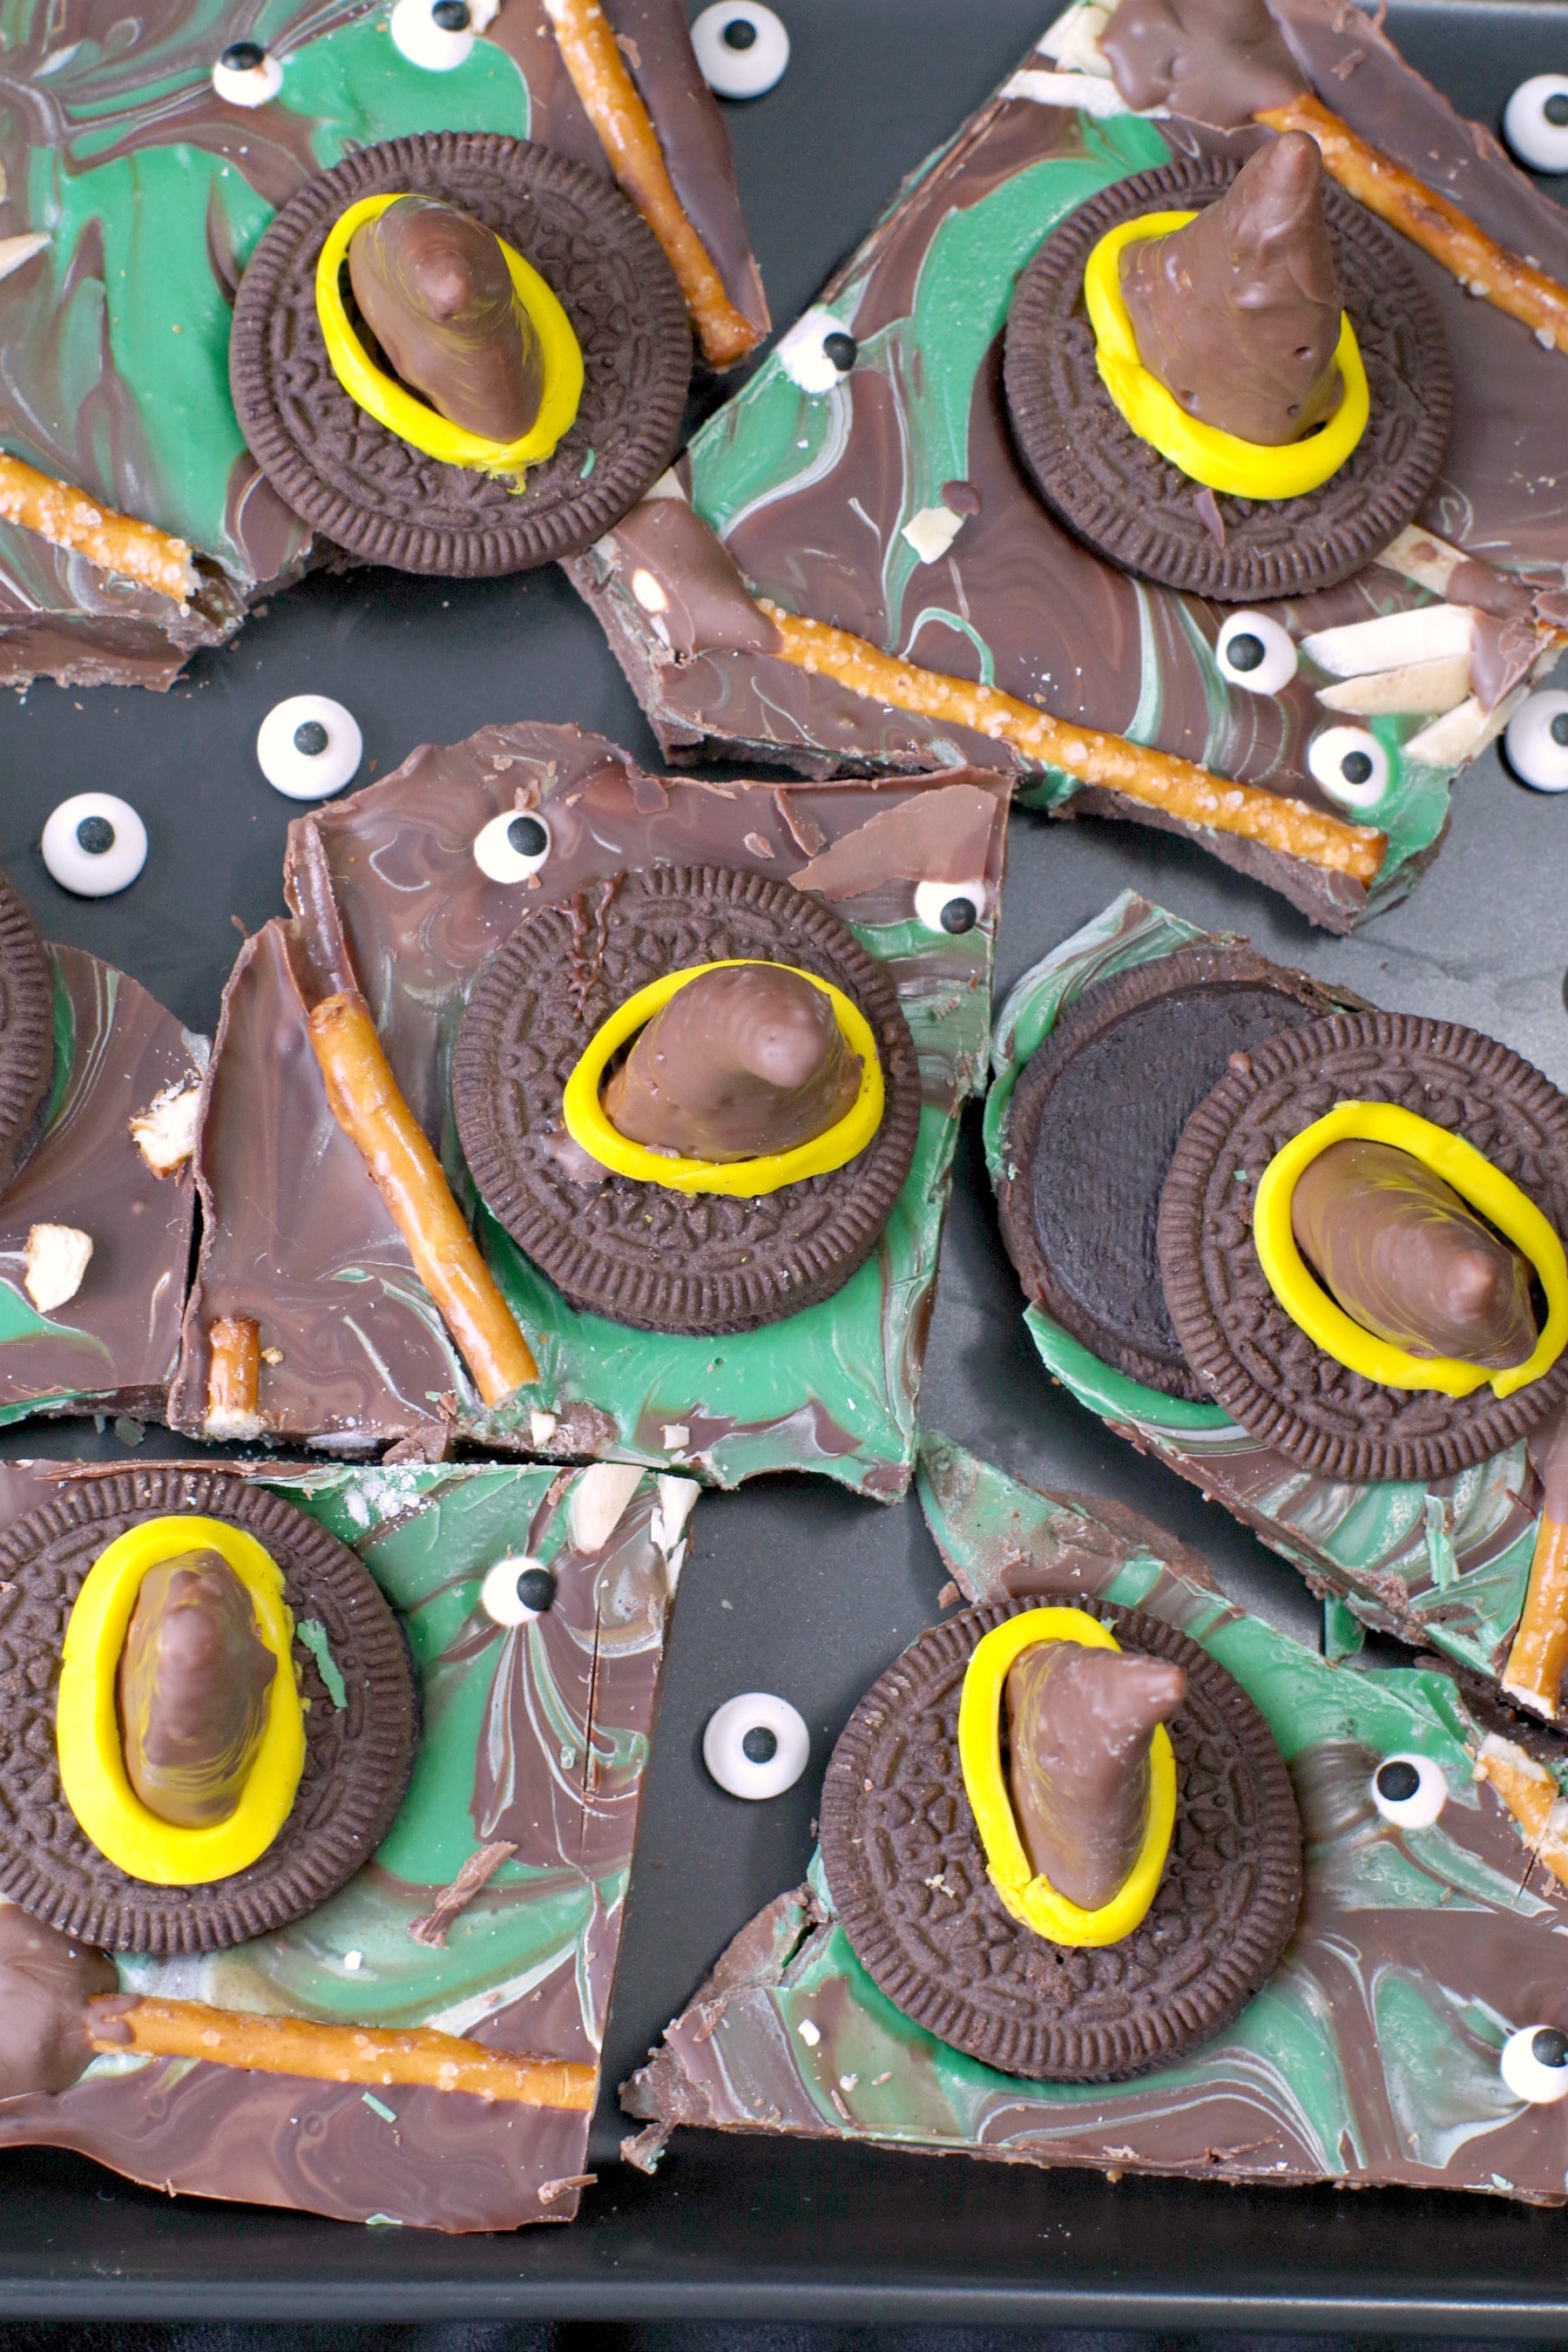 Melting Witch Halloween Chocolate Bark broken into pieces on black platter with extra candy eyes scattered on plate